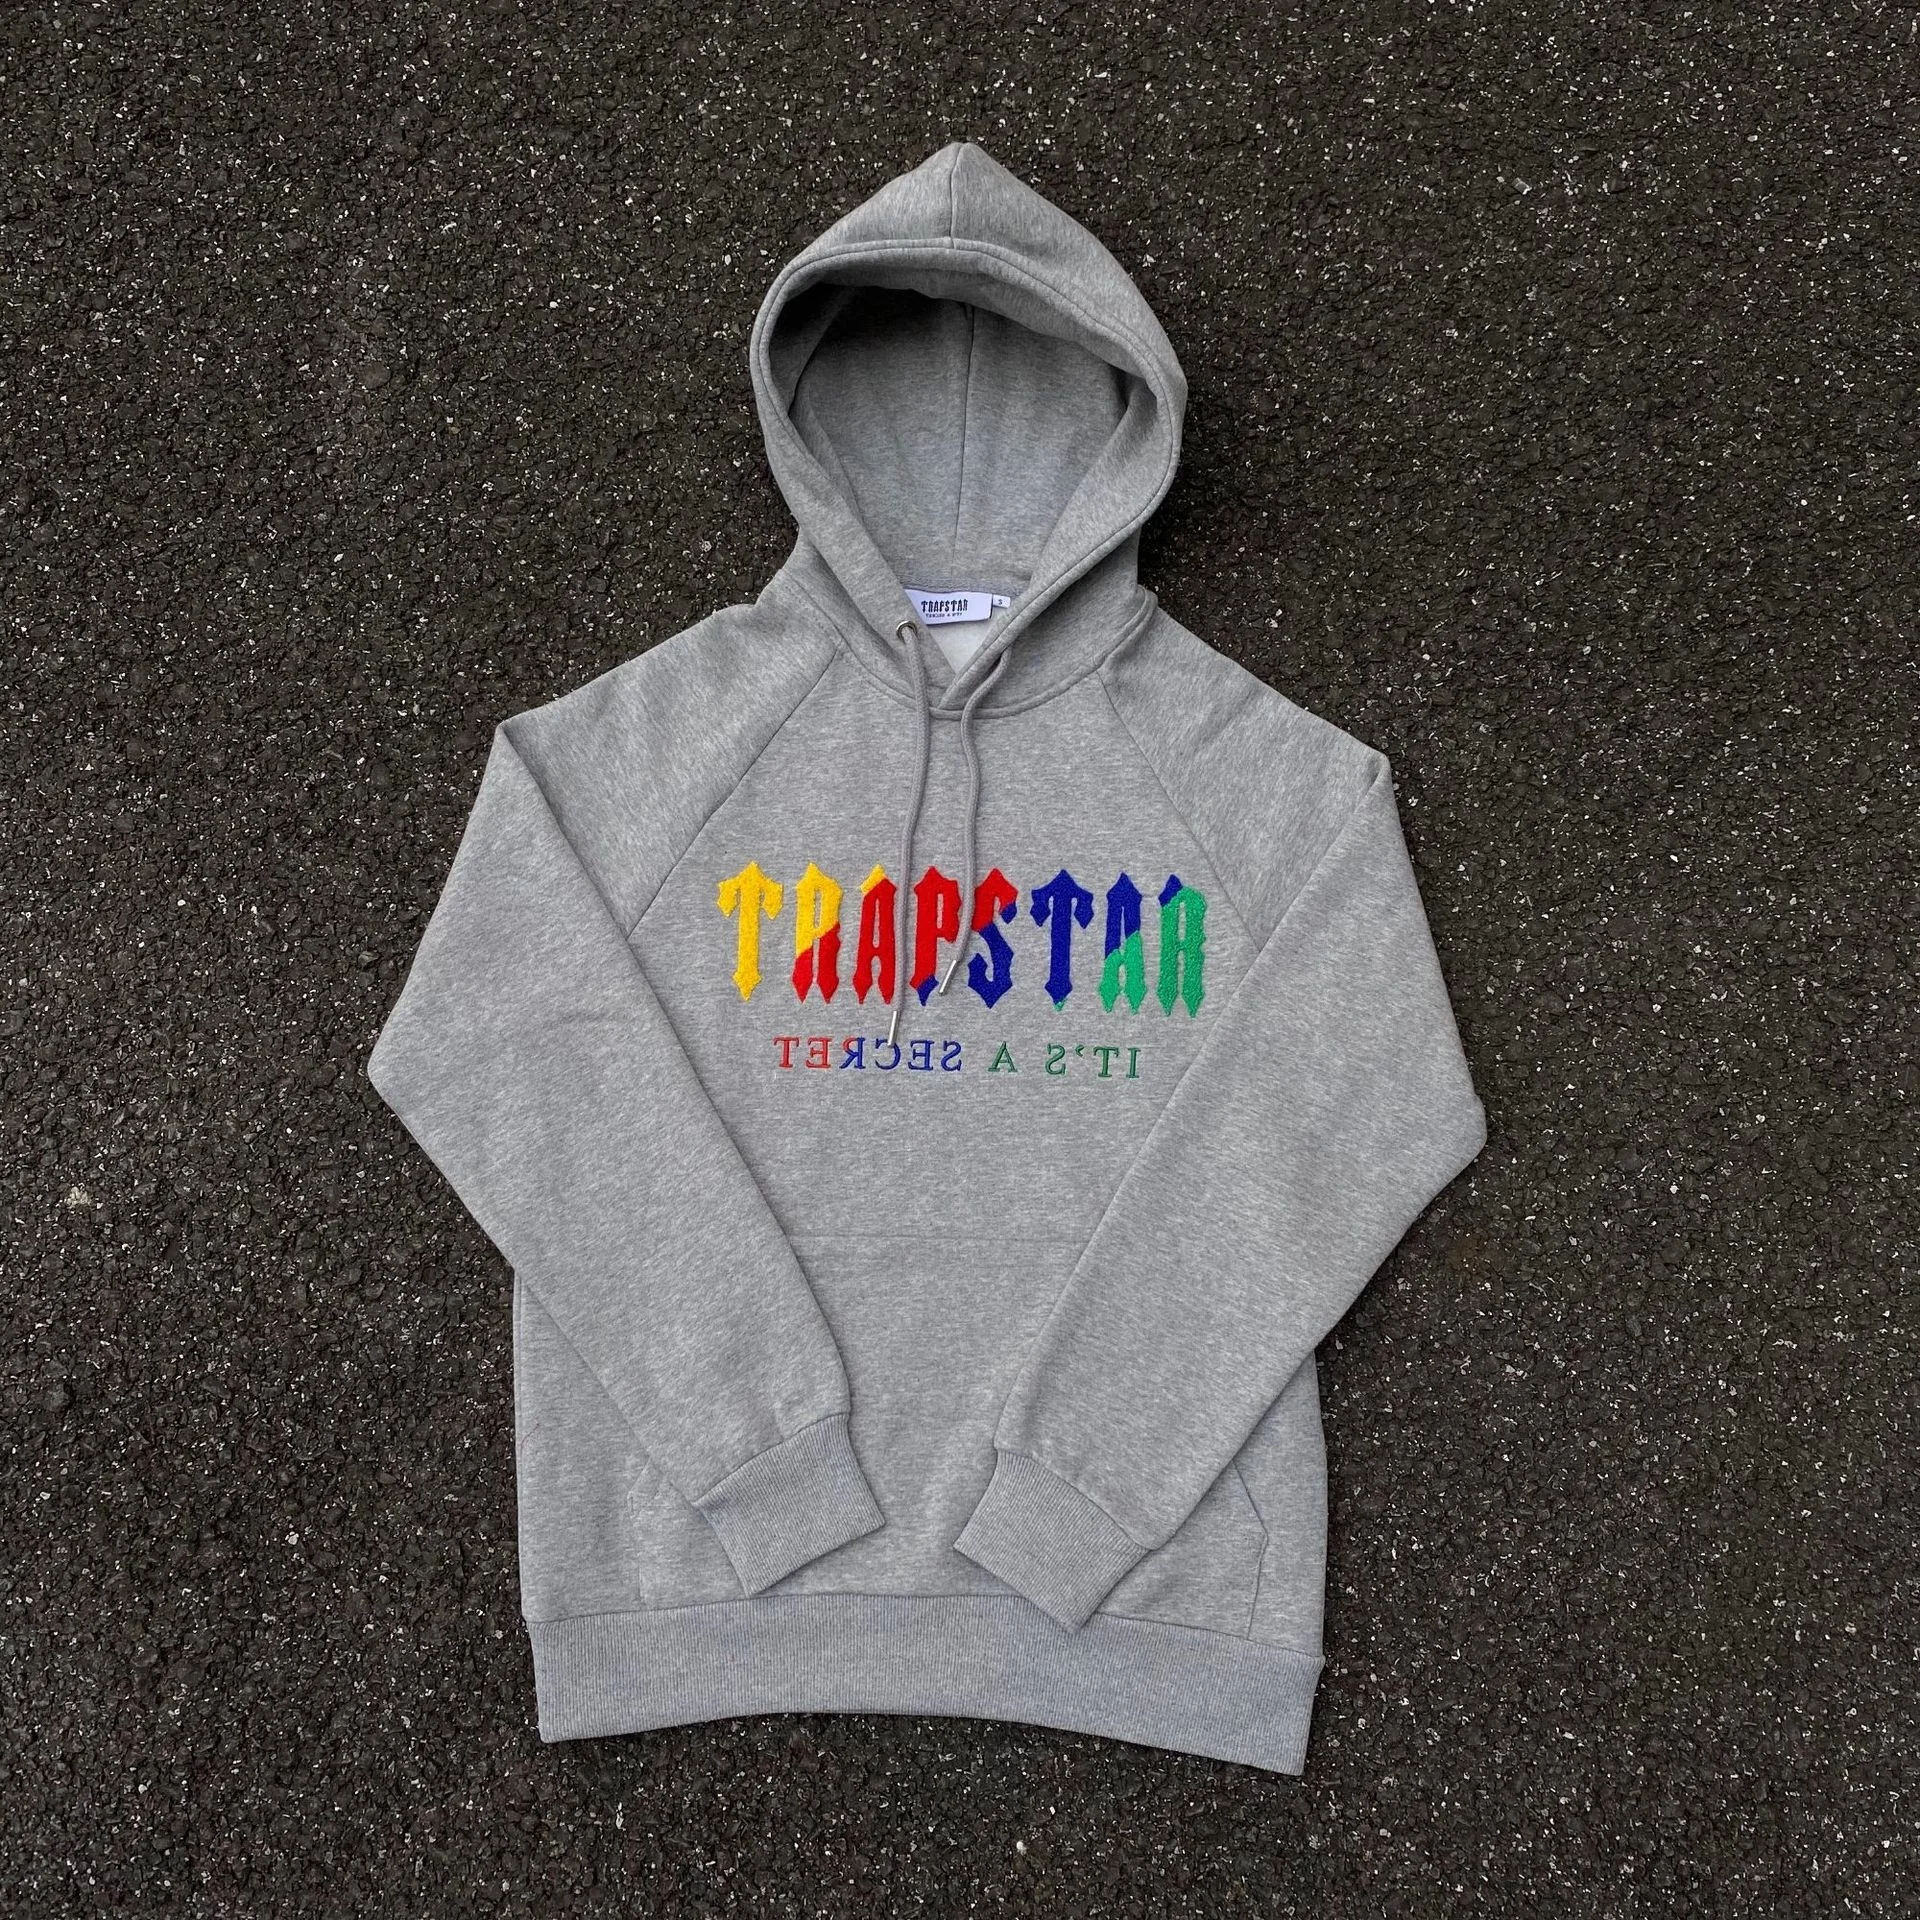 

London Trapstar Towel Embroidered Hoodies High Quality Oversized Letter Gradient Fleece Casual Sweatshirt Tops Men Tracksuits